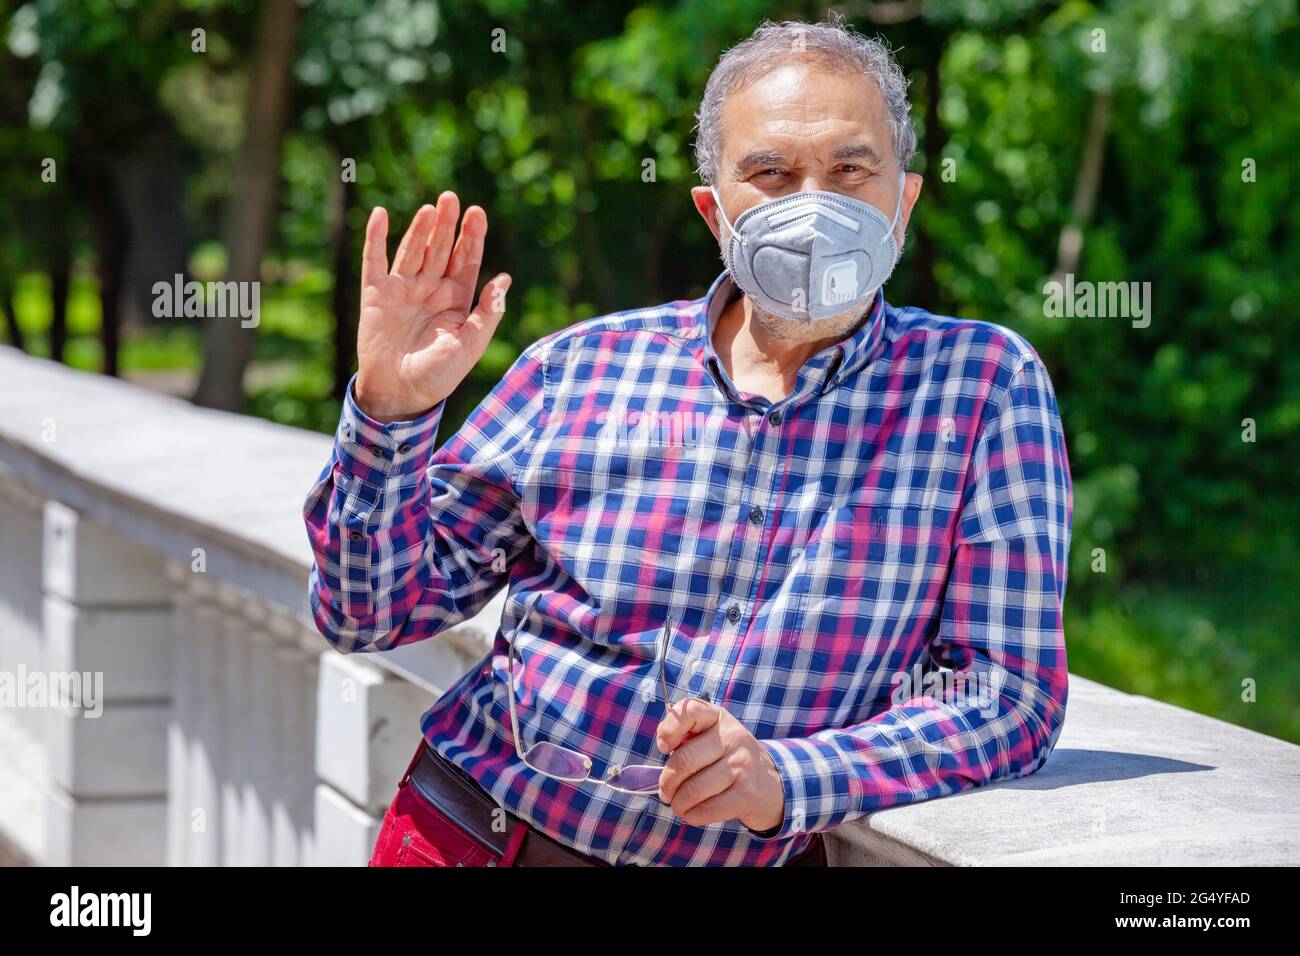 Elderly men with casual clothing in the park during spring or summer time, wearing face protective mask is waving at camera. Stock Photo